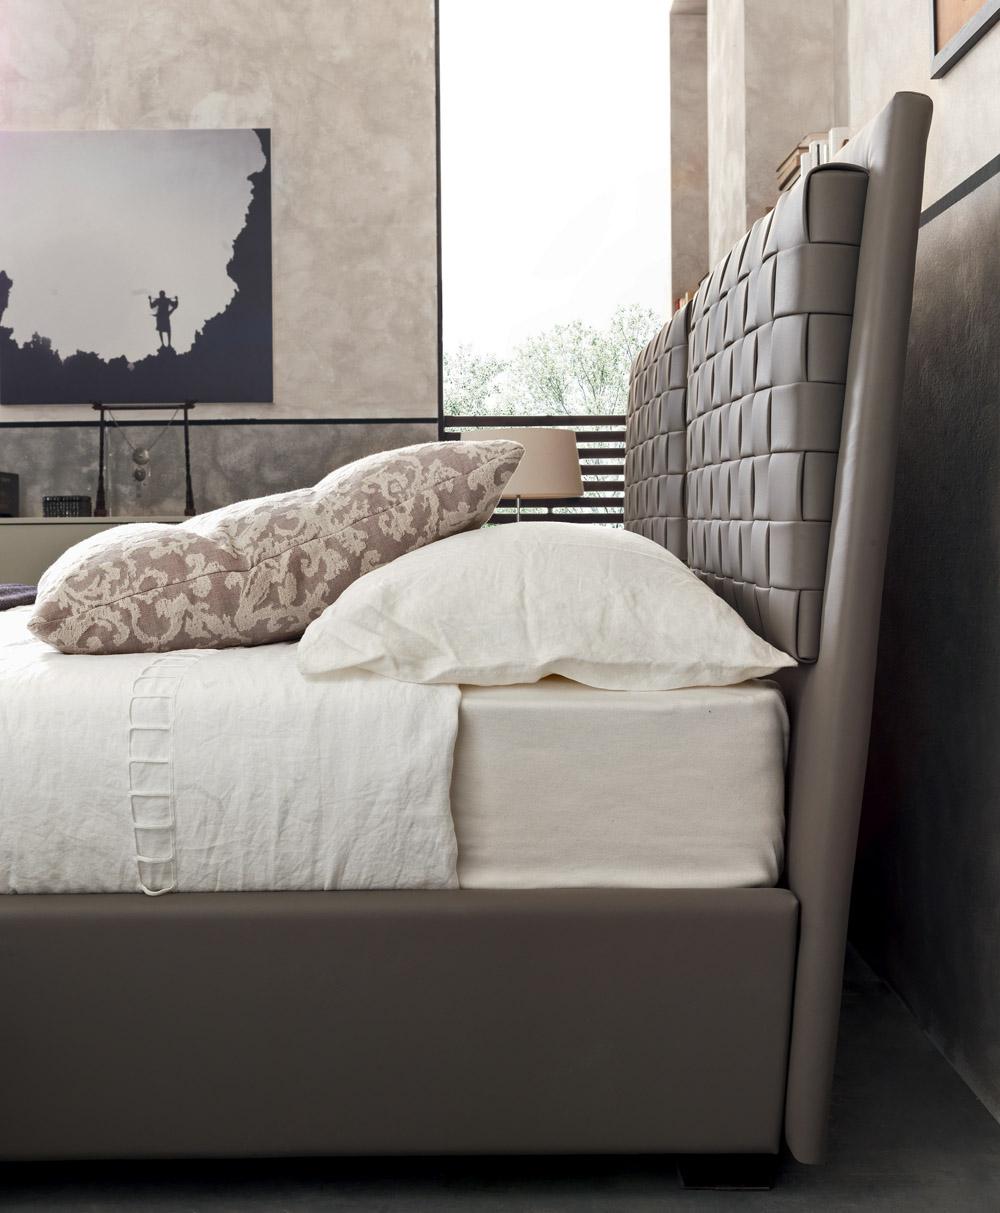 Made in Italy Leather Design Master Bedroom